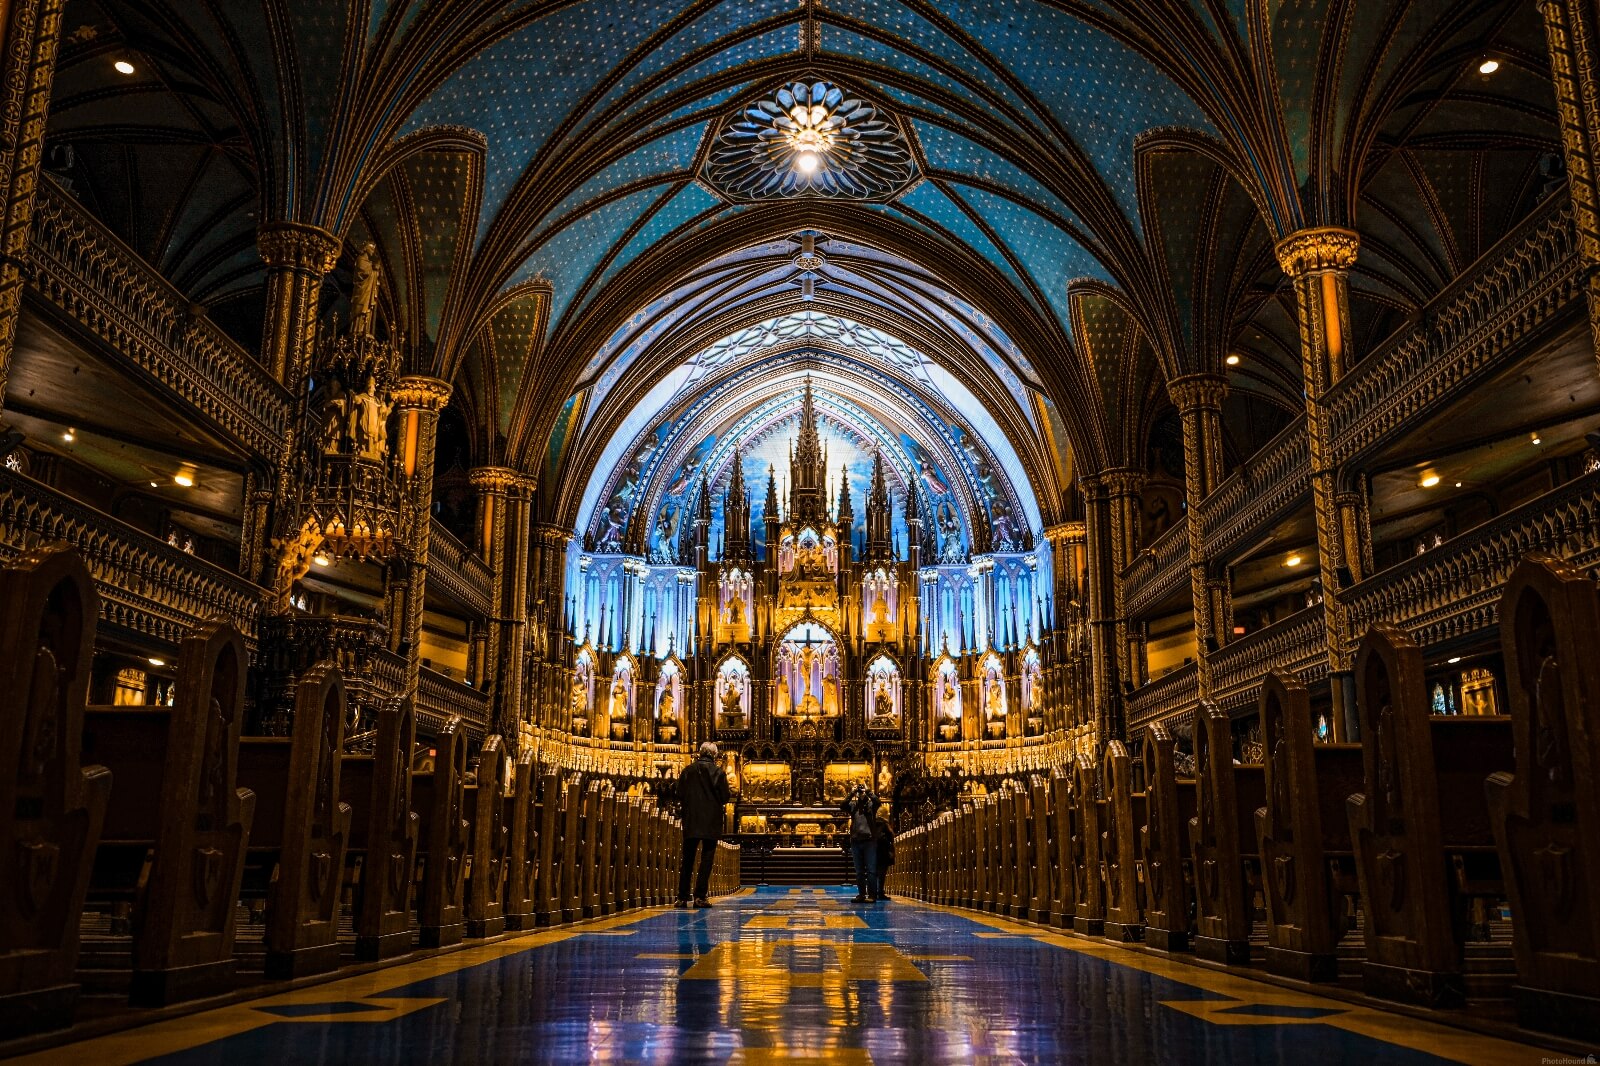 Image of Notre Dame Basilica by Jonny Brown